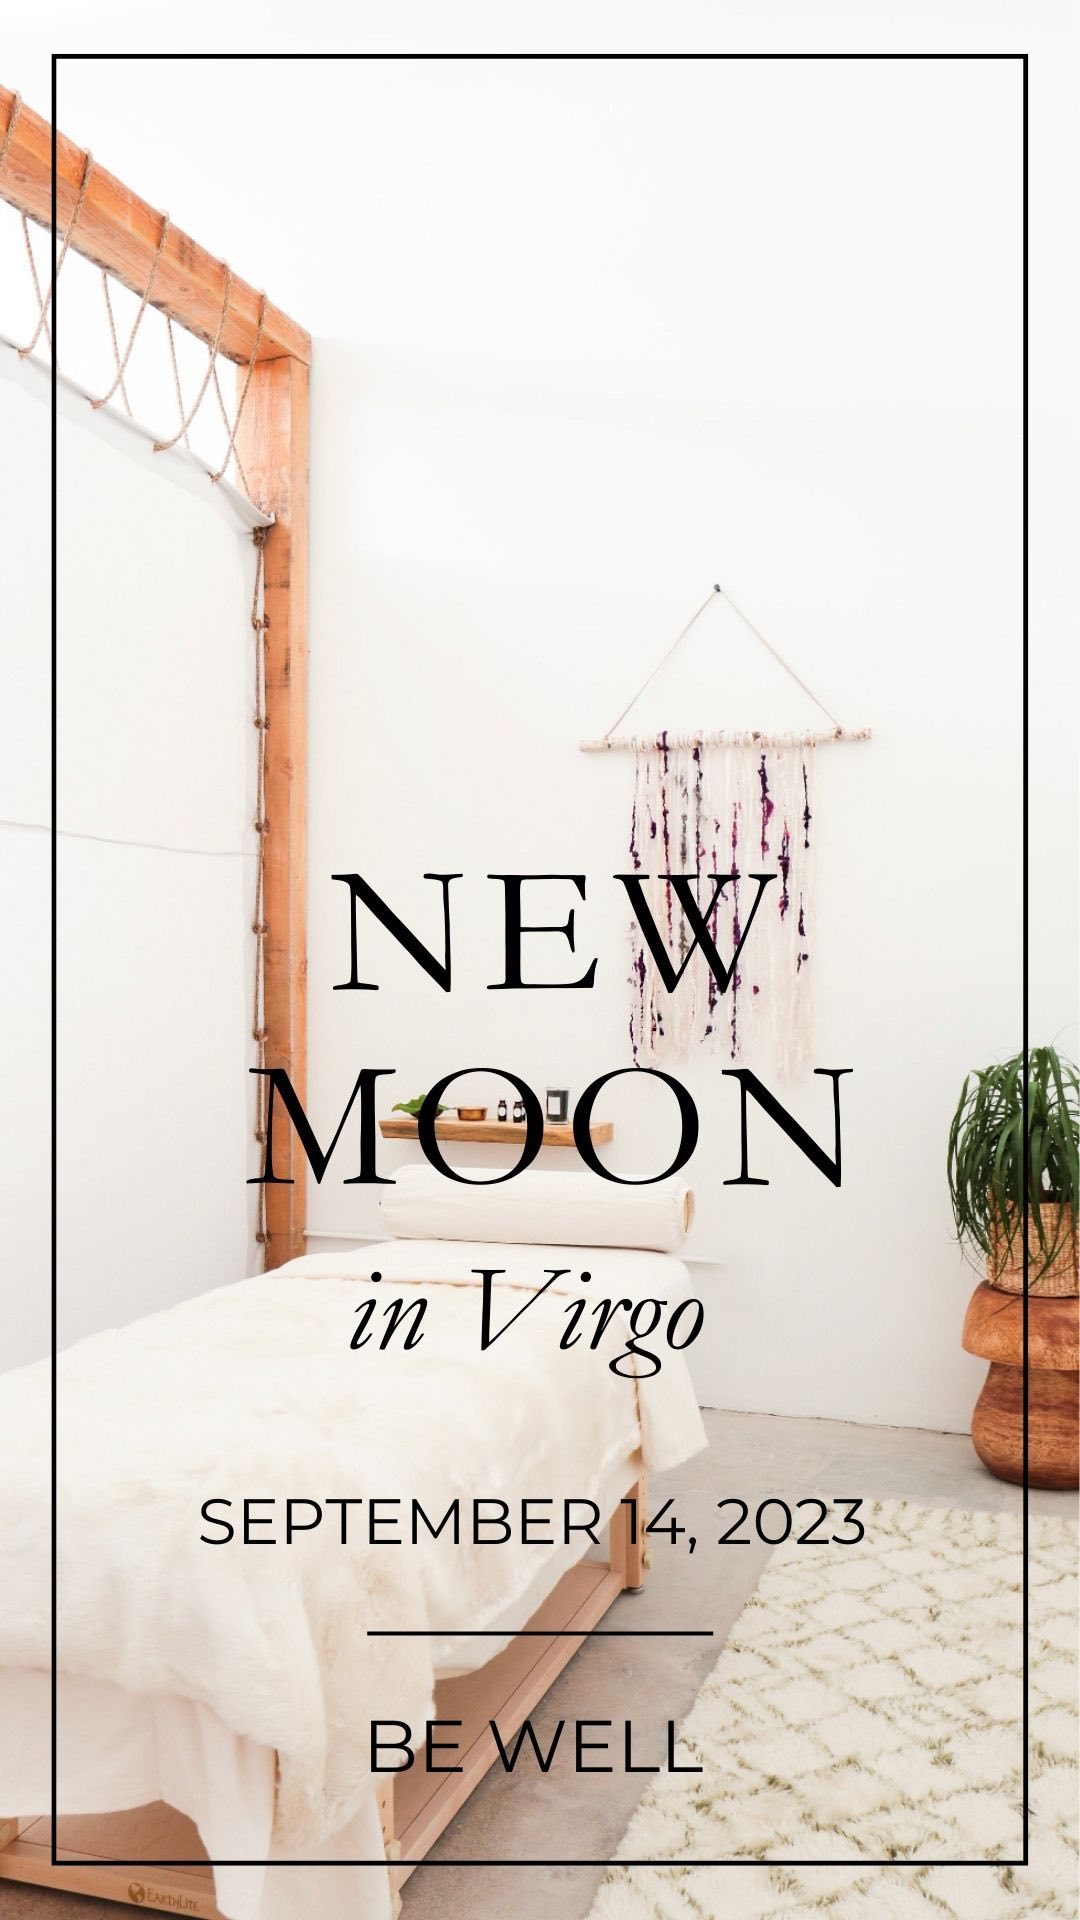 Embrace the cosmic vibes of the New Moon in Virgo with Ashley Cramer @alignwiththemoon , lunar astrologist. 

Featured are some of our favorite wellness businesses @vivefloatstudio @souldnvr @thenowmassage 

Stay tuned for our Winter 2023 issue, launching on December 1st, featuring the Cherry Creek Wellness & Beauty Guide. Secure your space now by sending us a DM! #NewMoonMagic #Astrology #WellnessGuide #denverwellness #denverastrology